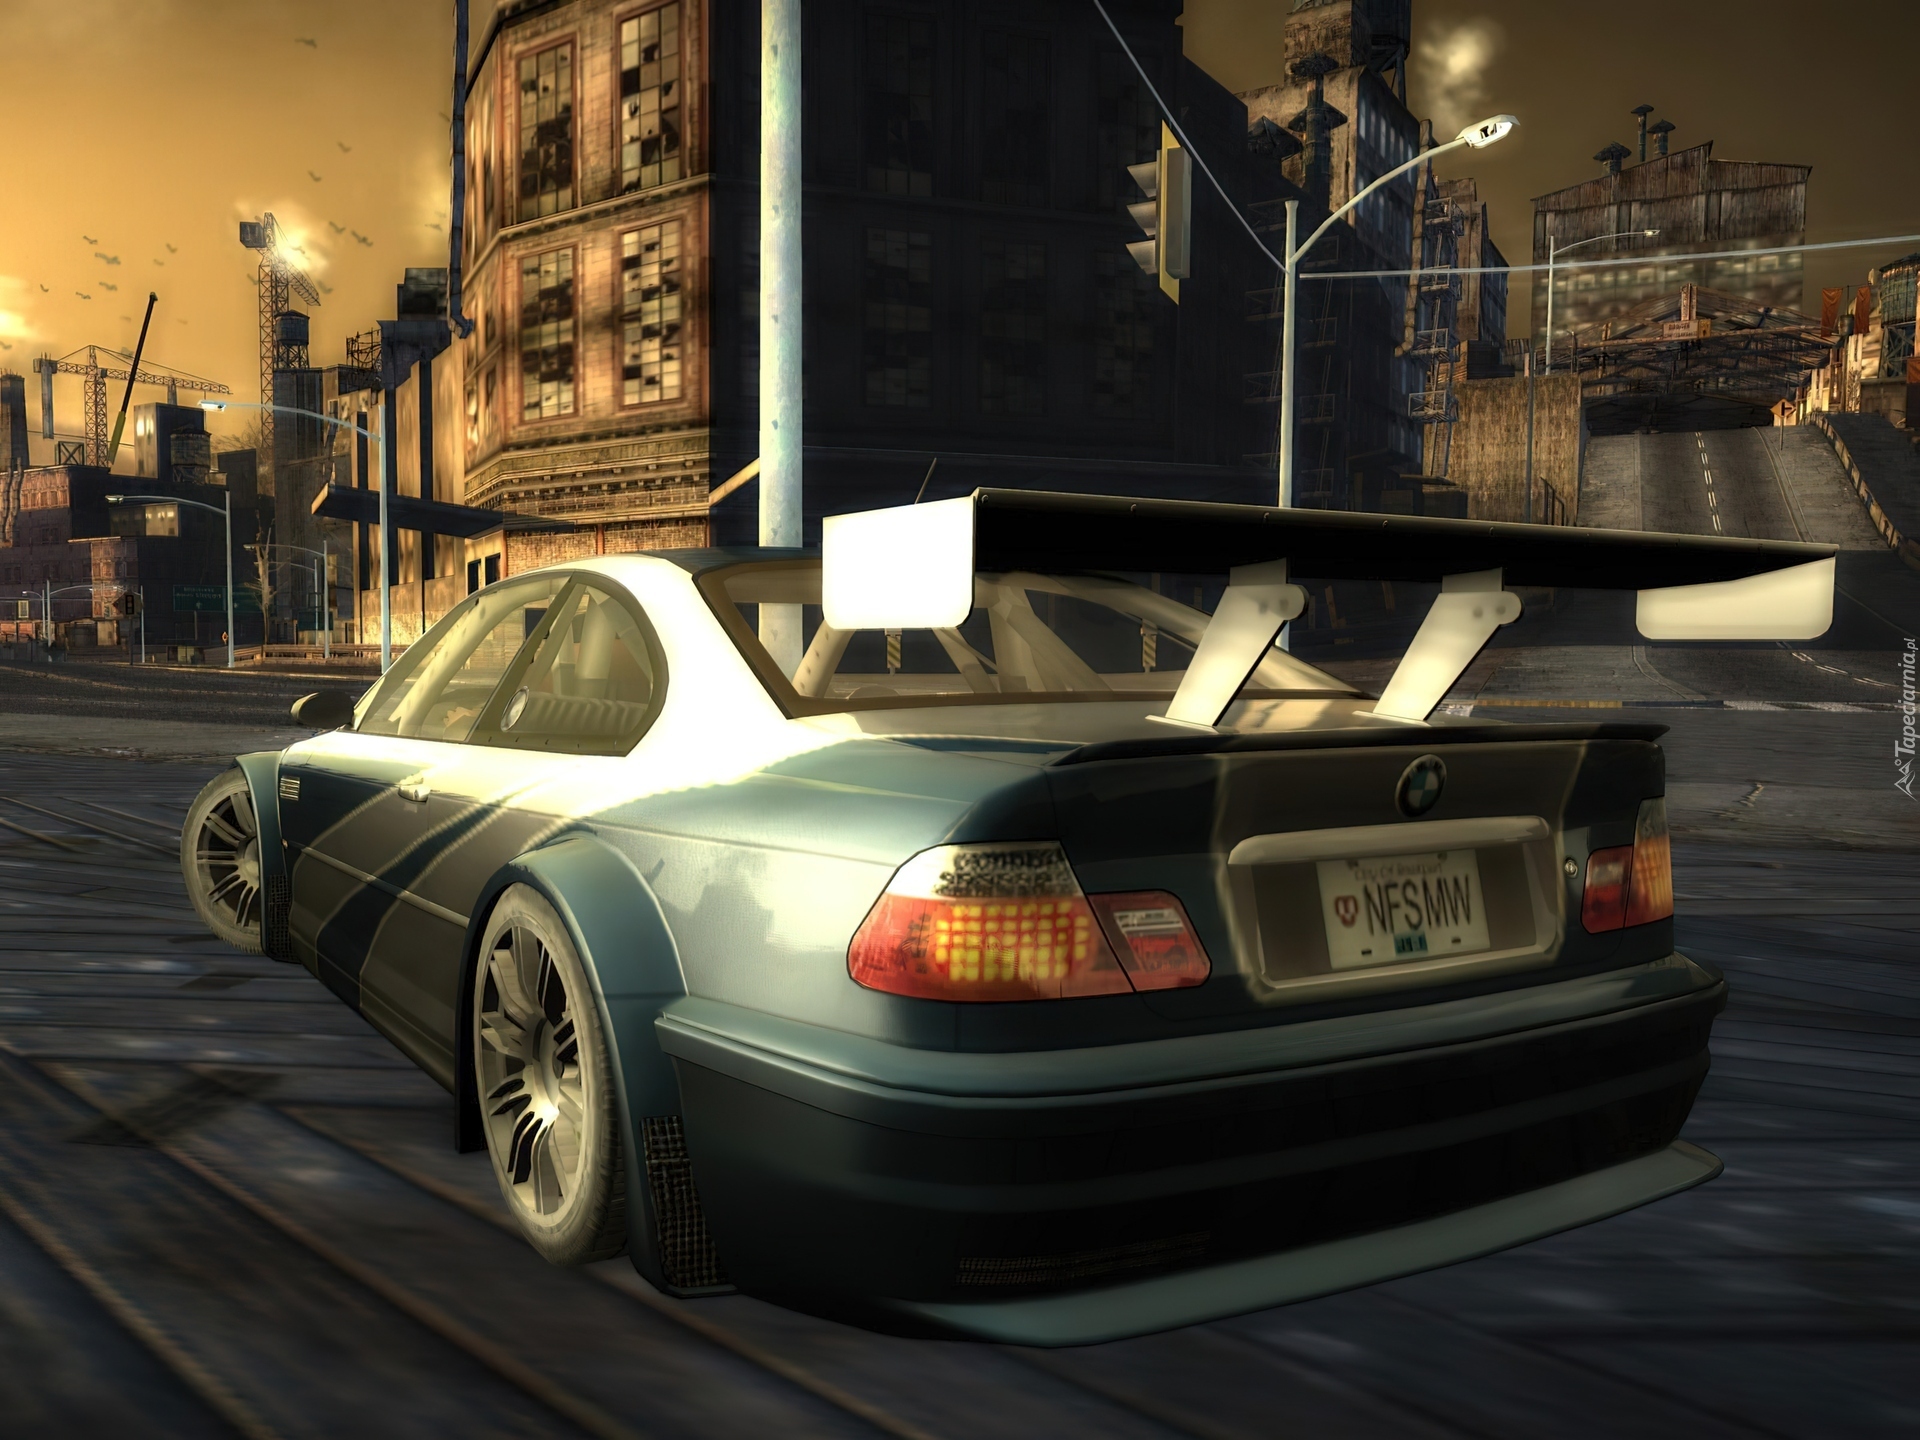 Саундтреки нфс мост вантед. Most wanted 2005 Black Edition машины. BMW m3 GTR NFS MW. Гонки NFS most wanted. Need for Speed most wanted 2005.